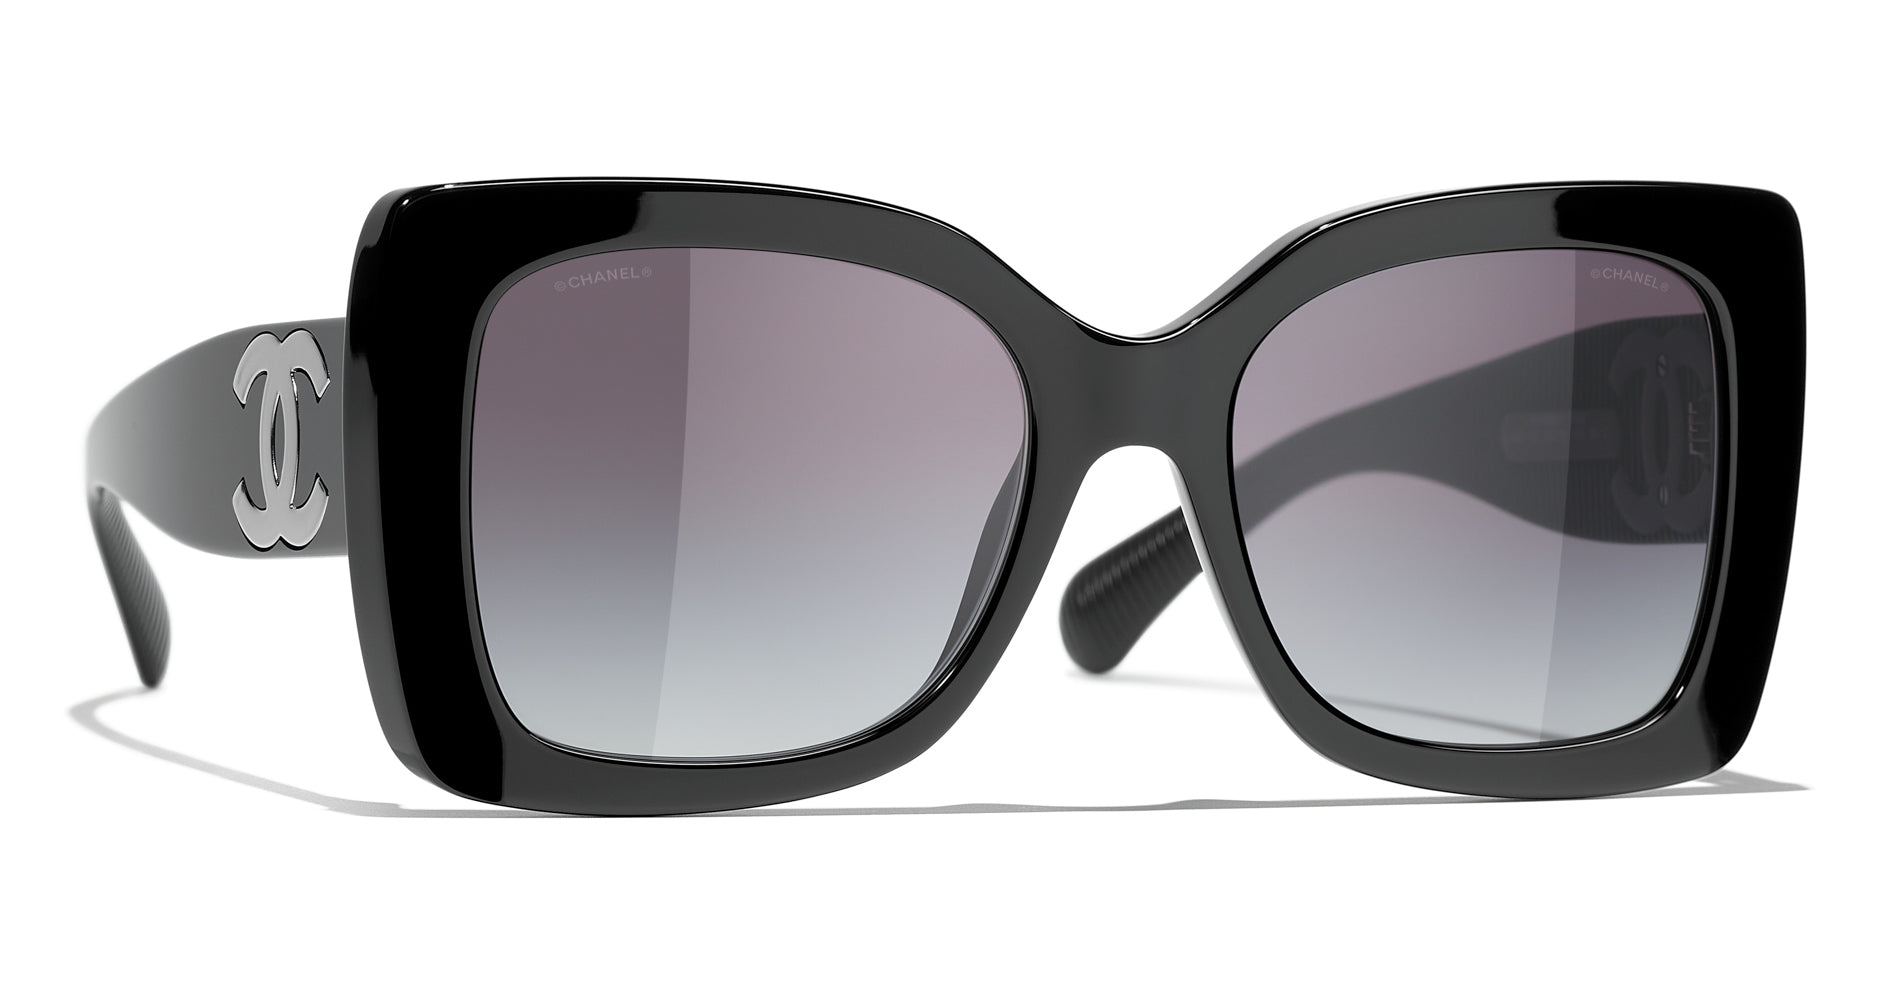 Chanel Oversized Sunglasses – The Turn